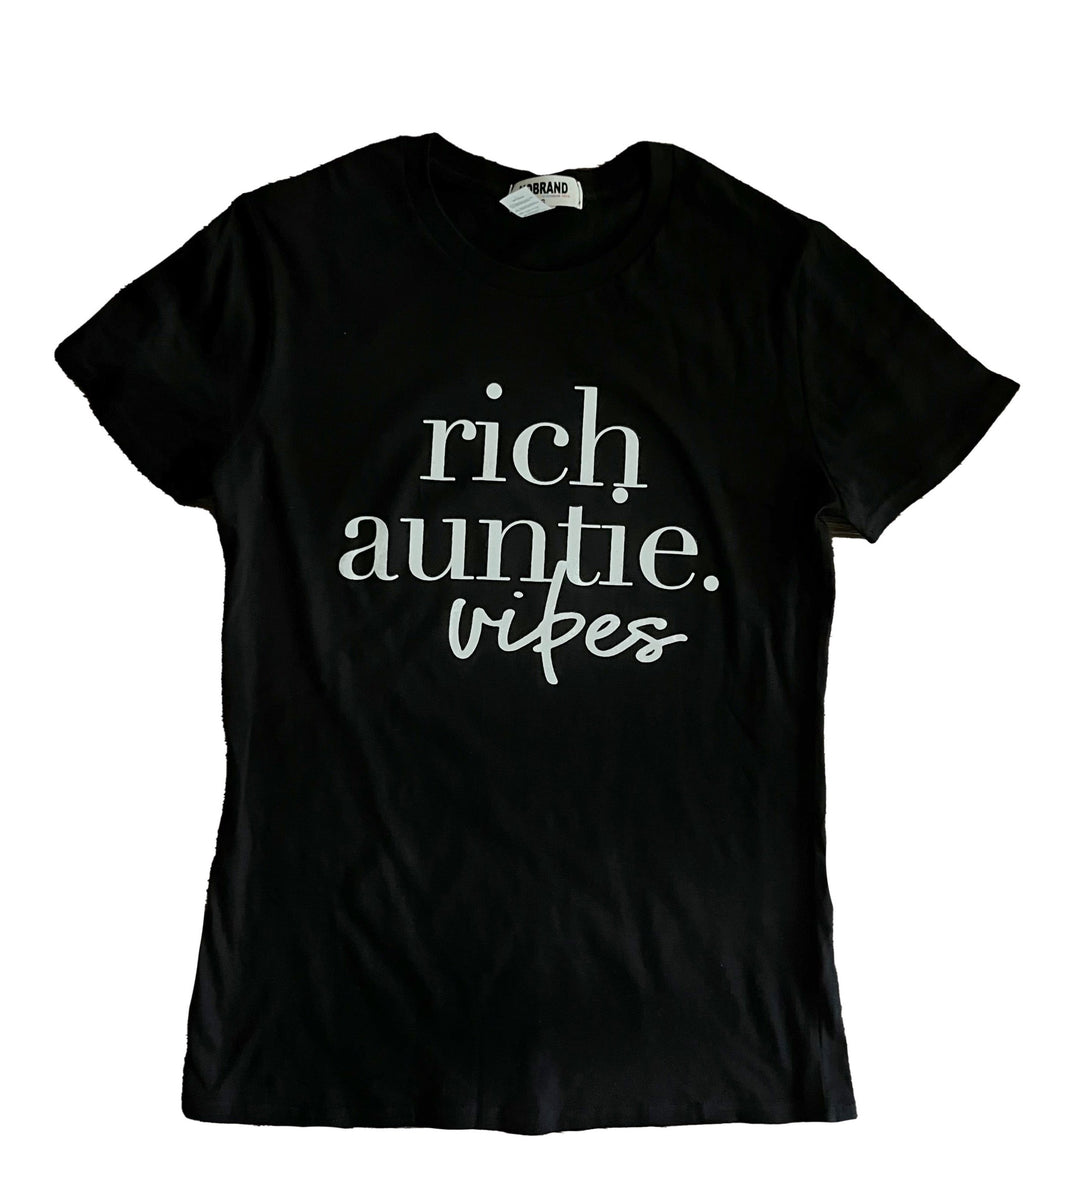 a black t - shirt with the words rich, anntie, vibes written